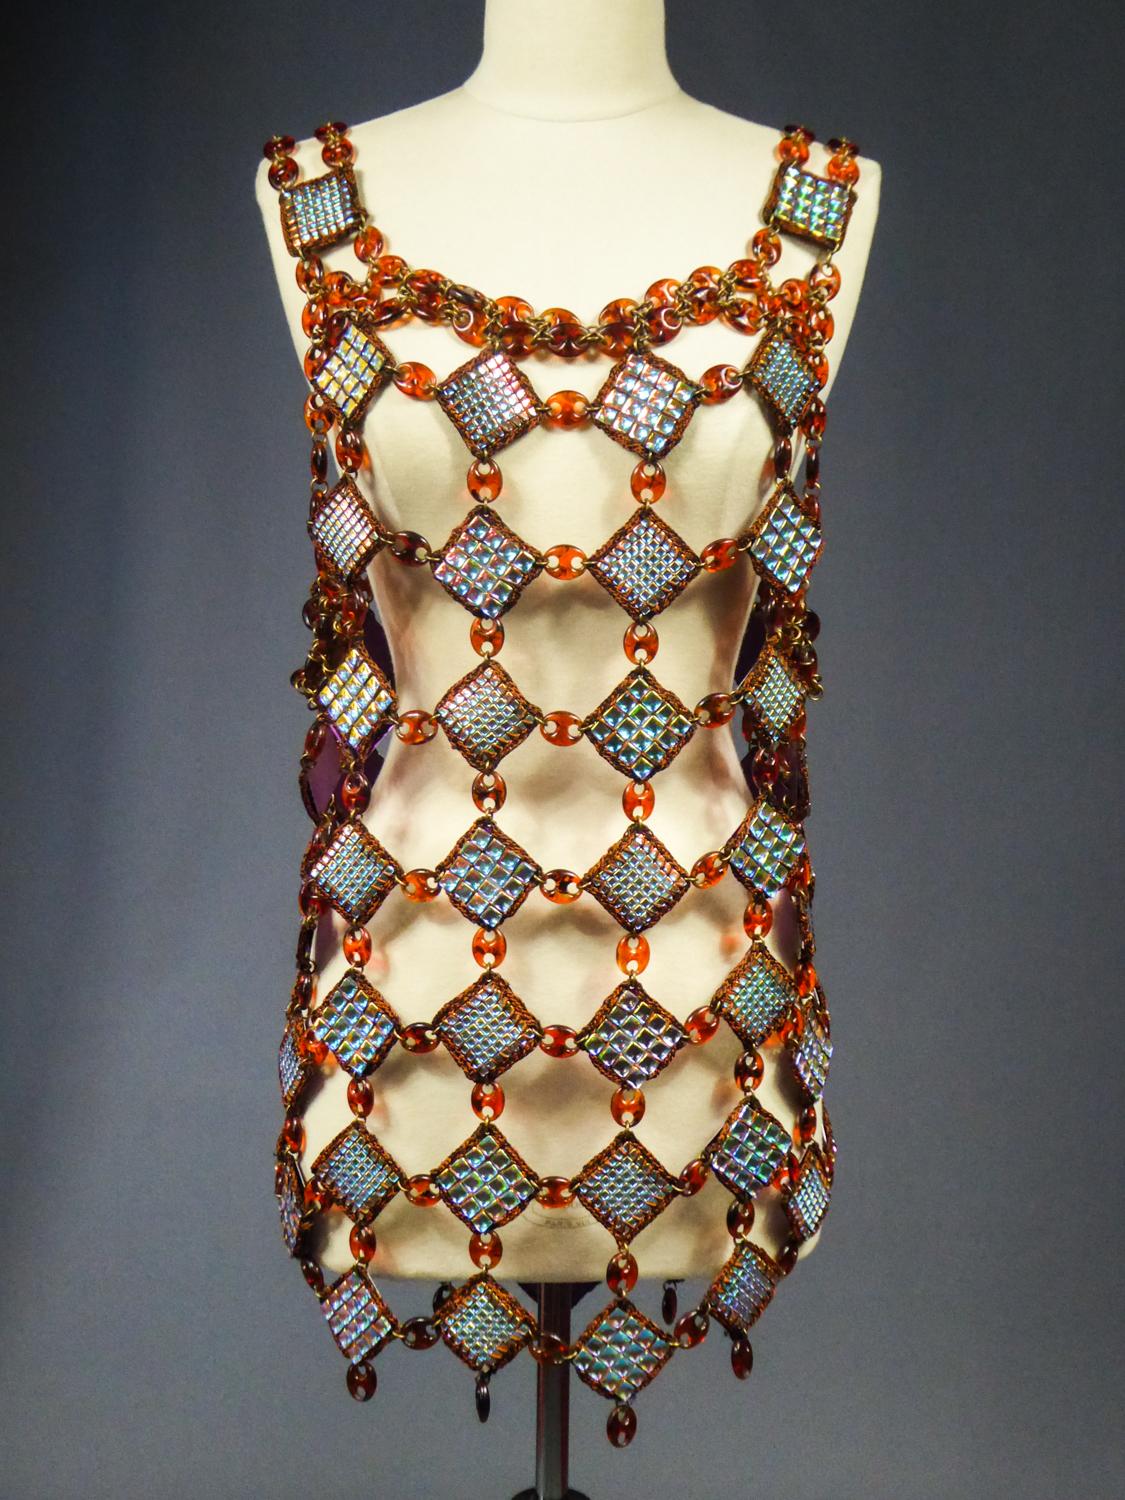 Circa 1980
France

Astonishing Haute Couture Paco Rabanne jewel dress or tunic without label and dating from the 1980s. Superb work of diamonds with iridescent silver pastilles framed by embroideries of brown silk threads. Assembly in links of brass